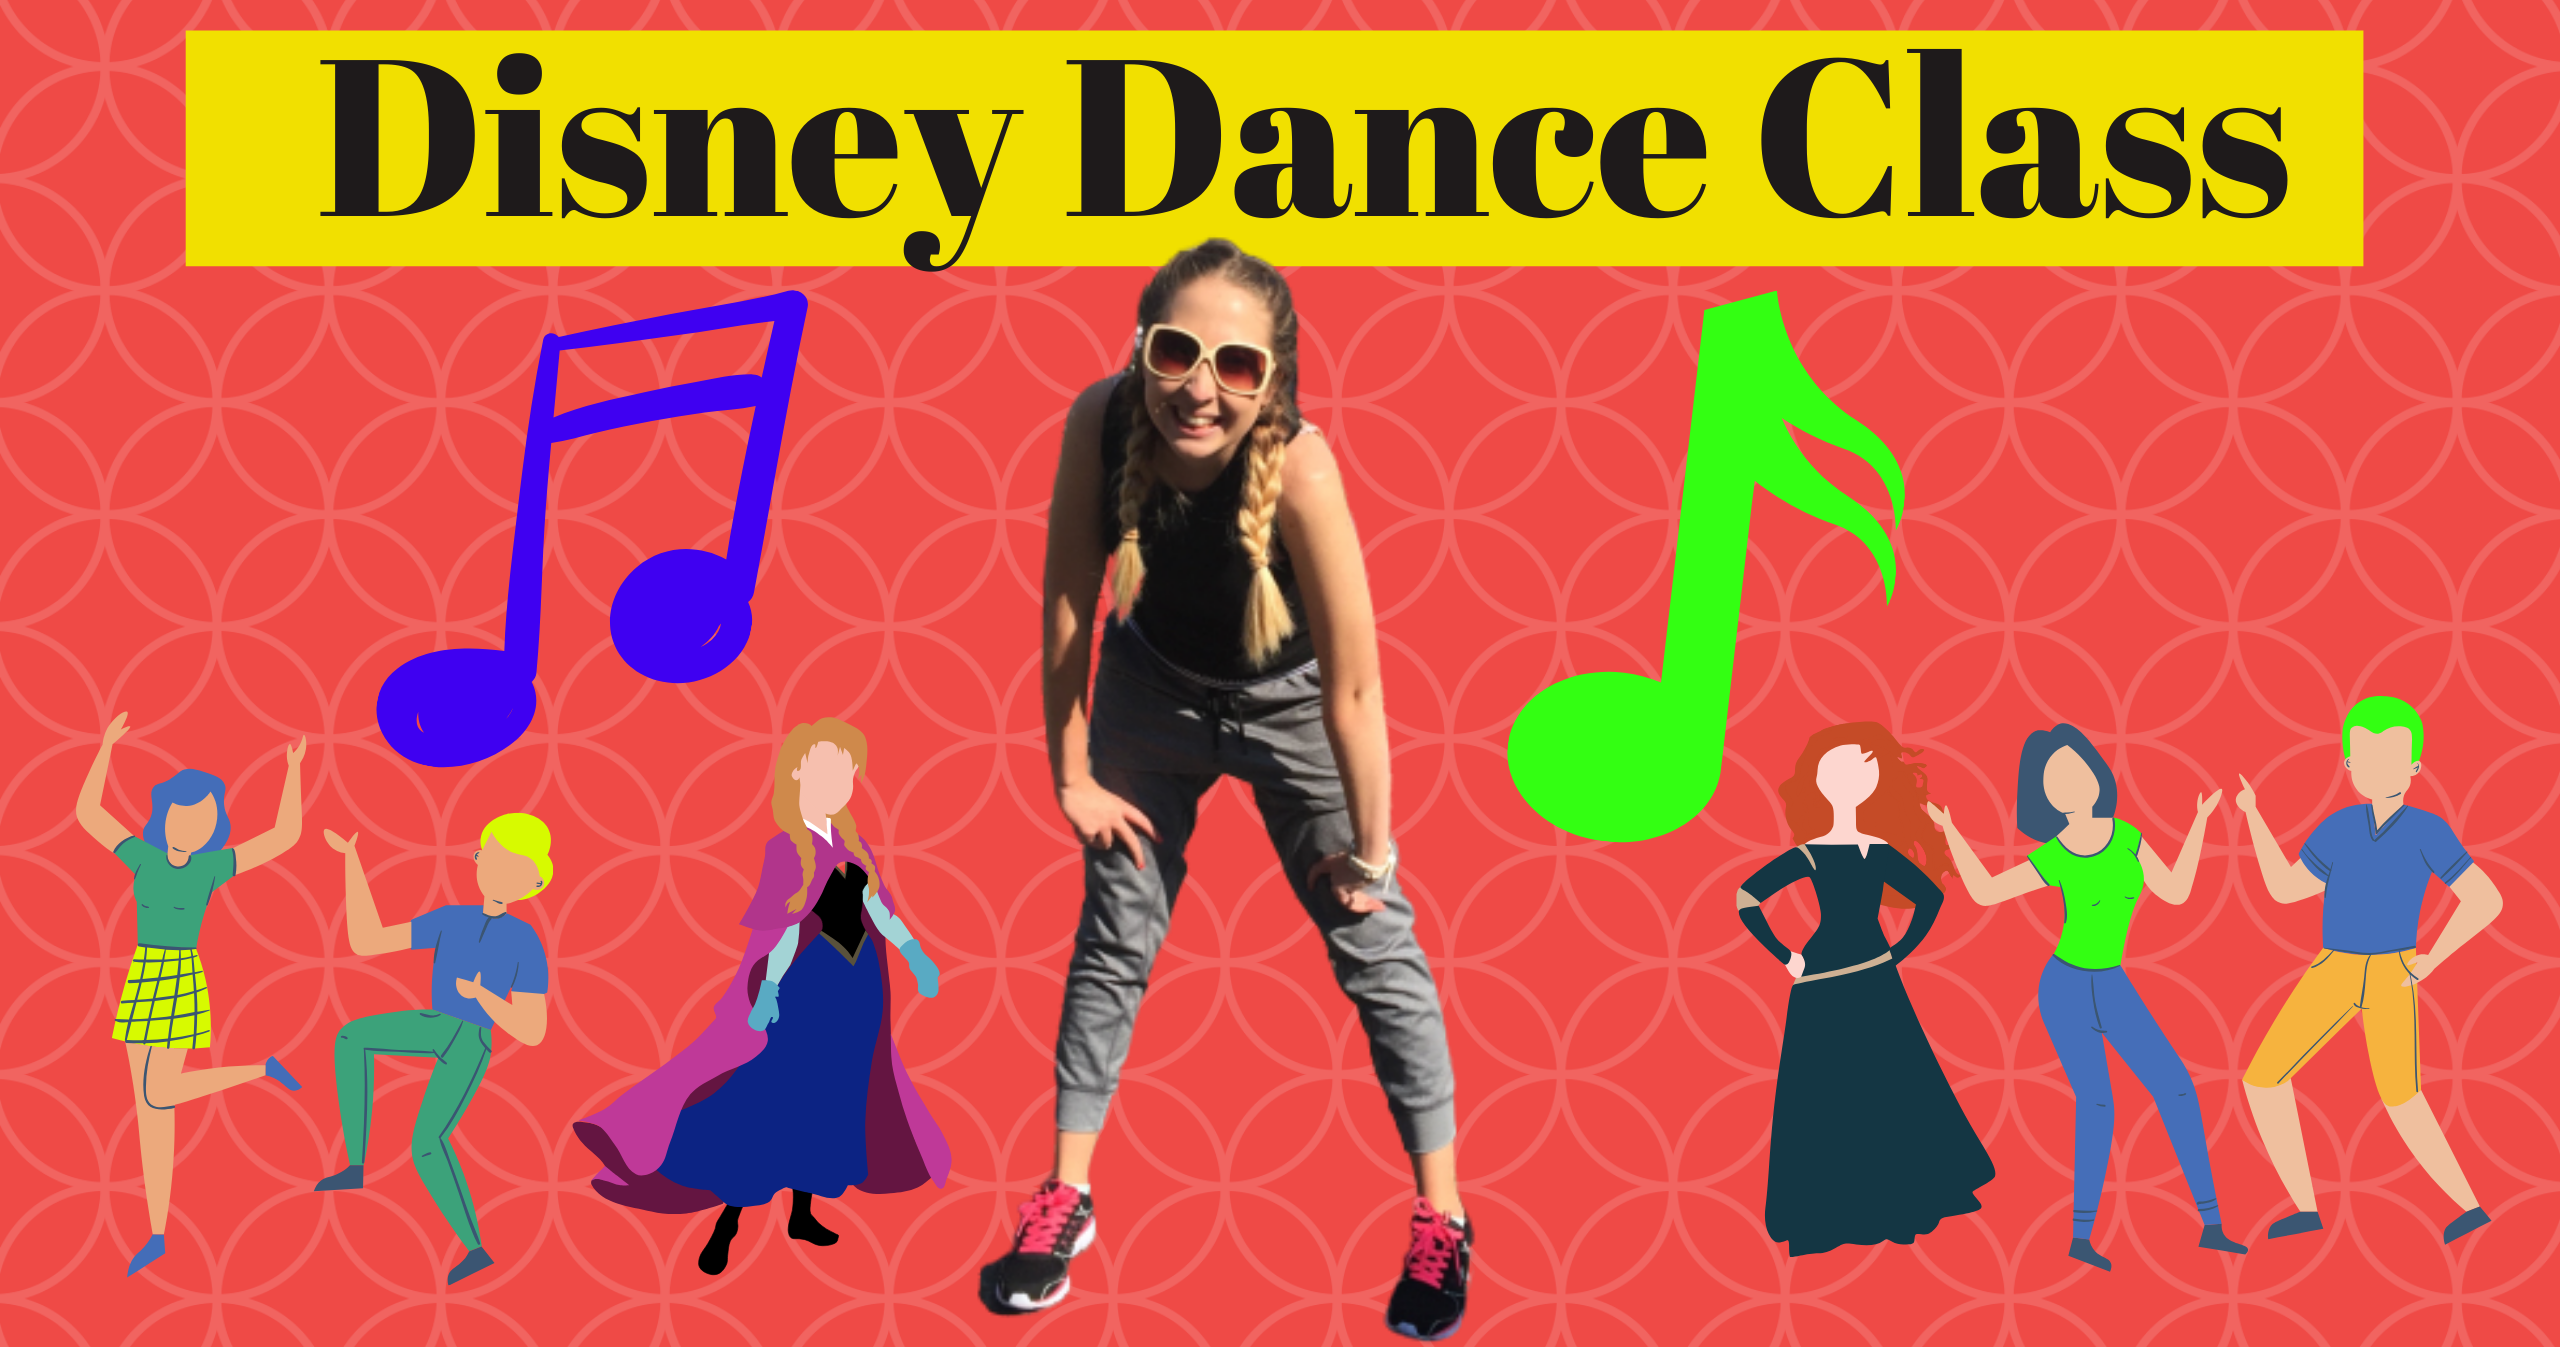 Disney-Themed Move It, Shake It, Dance Class for Kids! | Small Online Class  for Ages 3-8